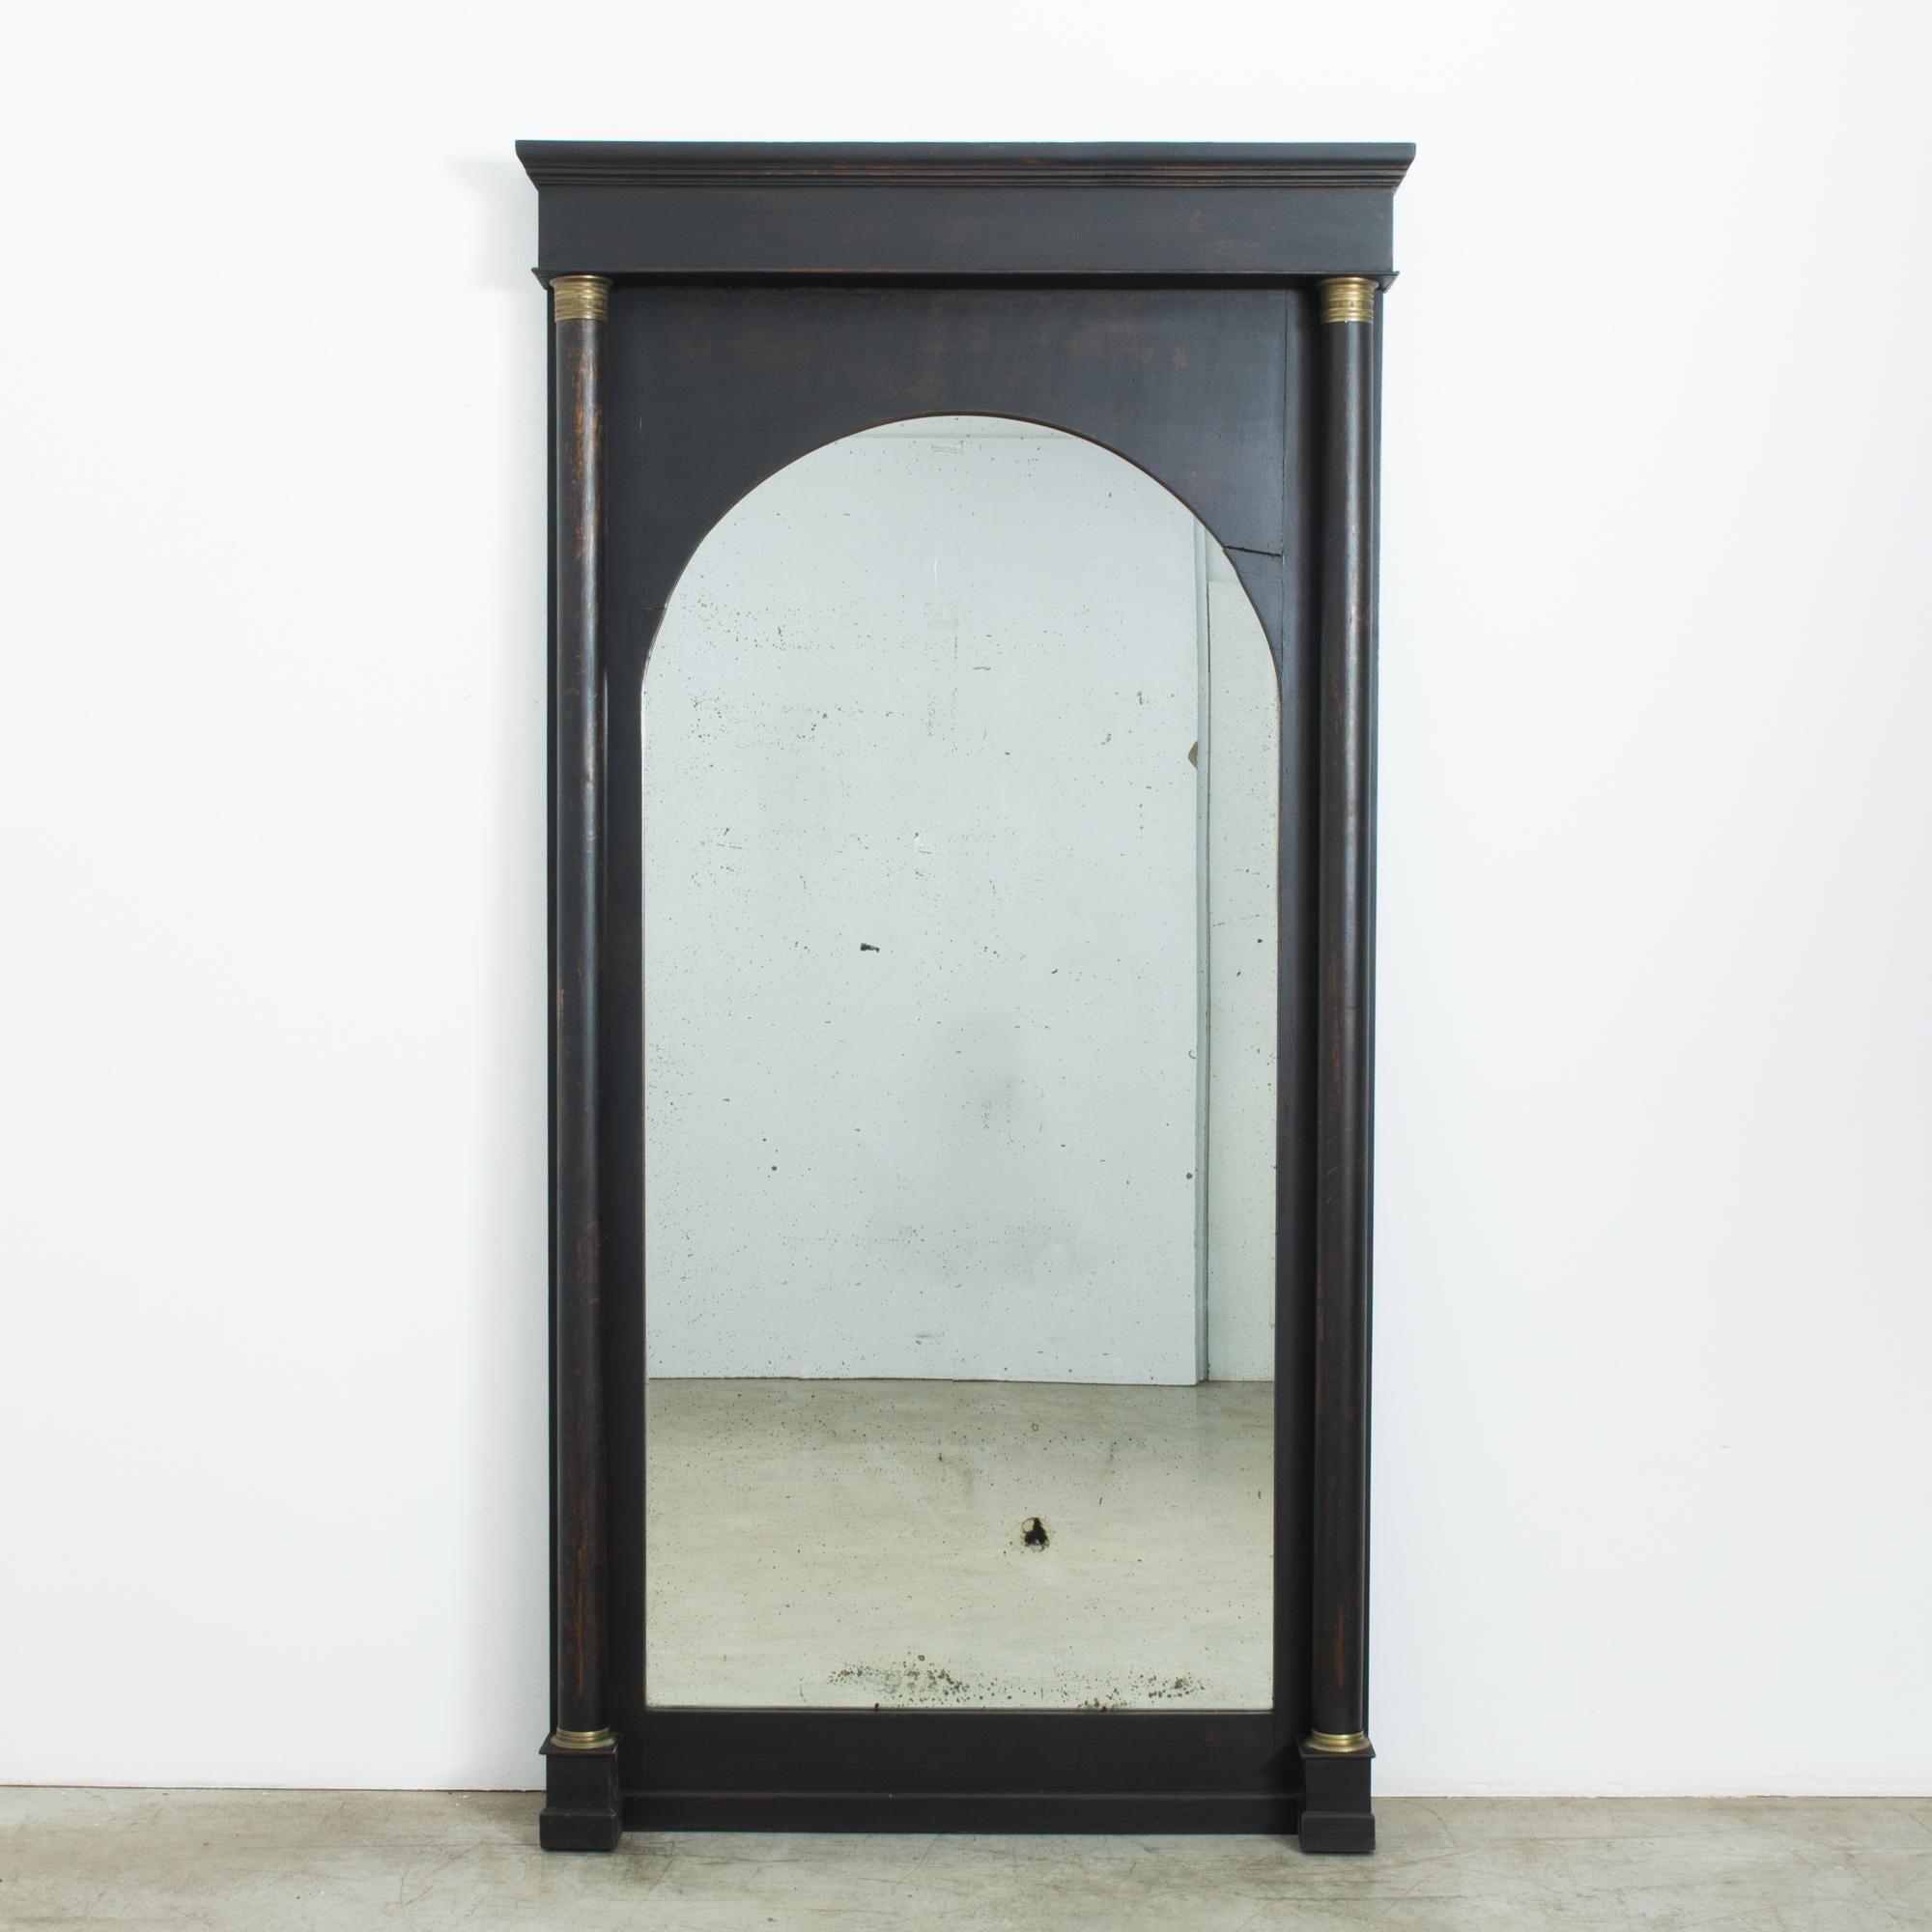 A black, wood framed mirror from France, produced in the 1840s. Standing at an impressive six feet six inches, this tall mirror stretches into a smooth arch. An Empire influneced style, flanked by two gold-capped pillars. Now delicately spotted with